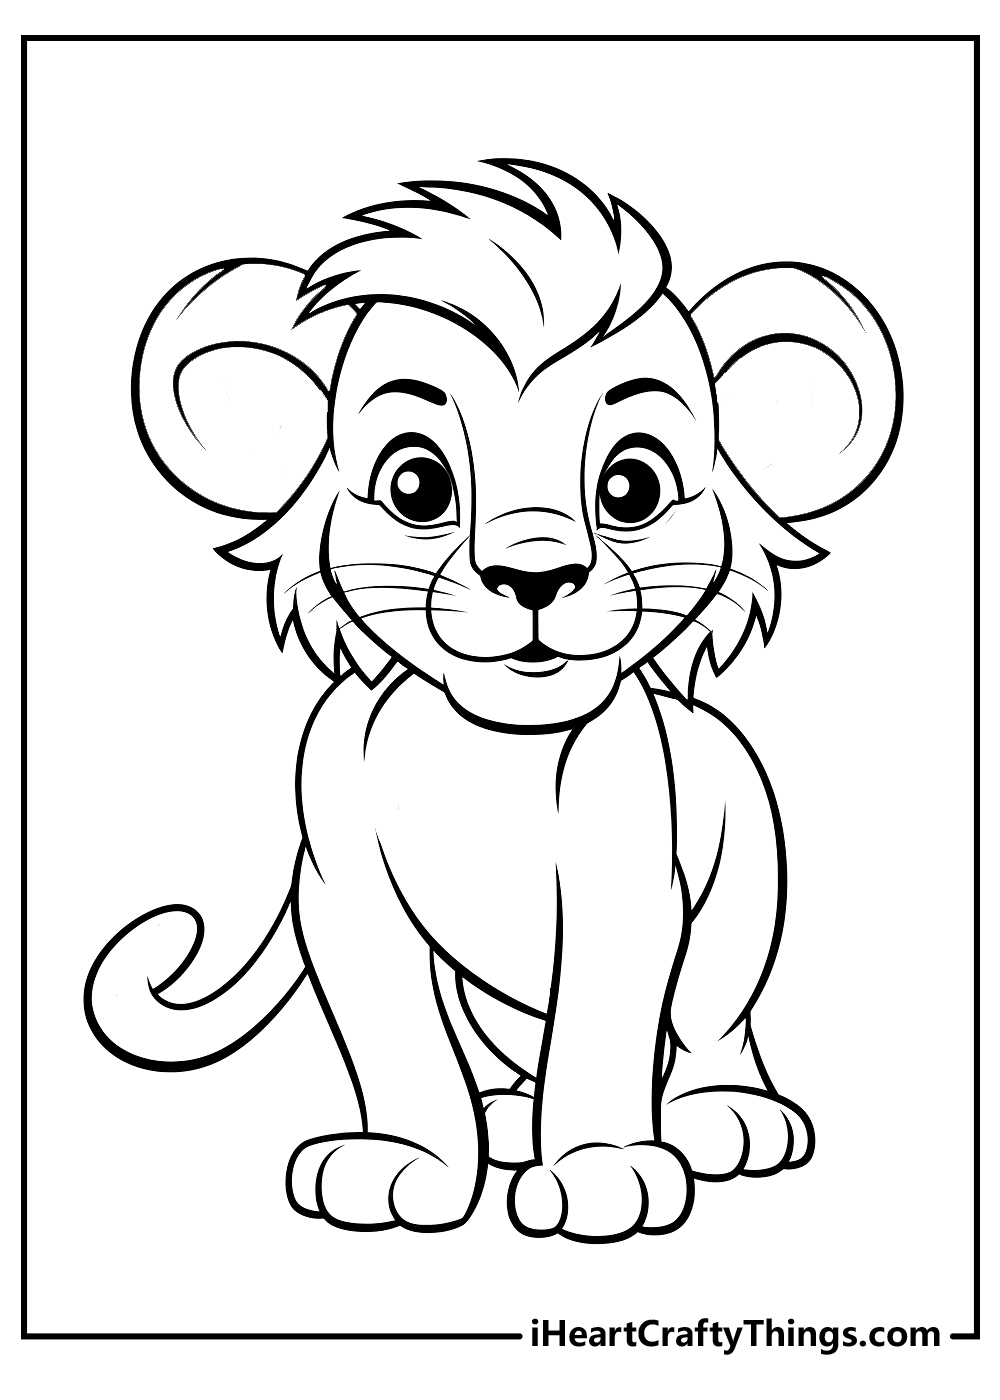 Lion coloring pages free printables